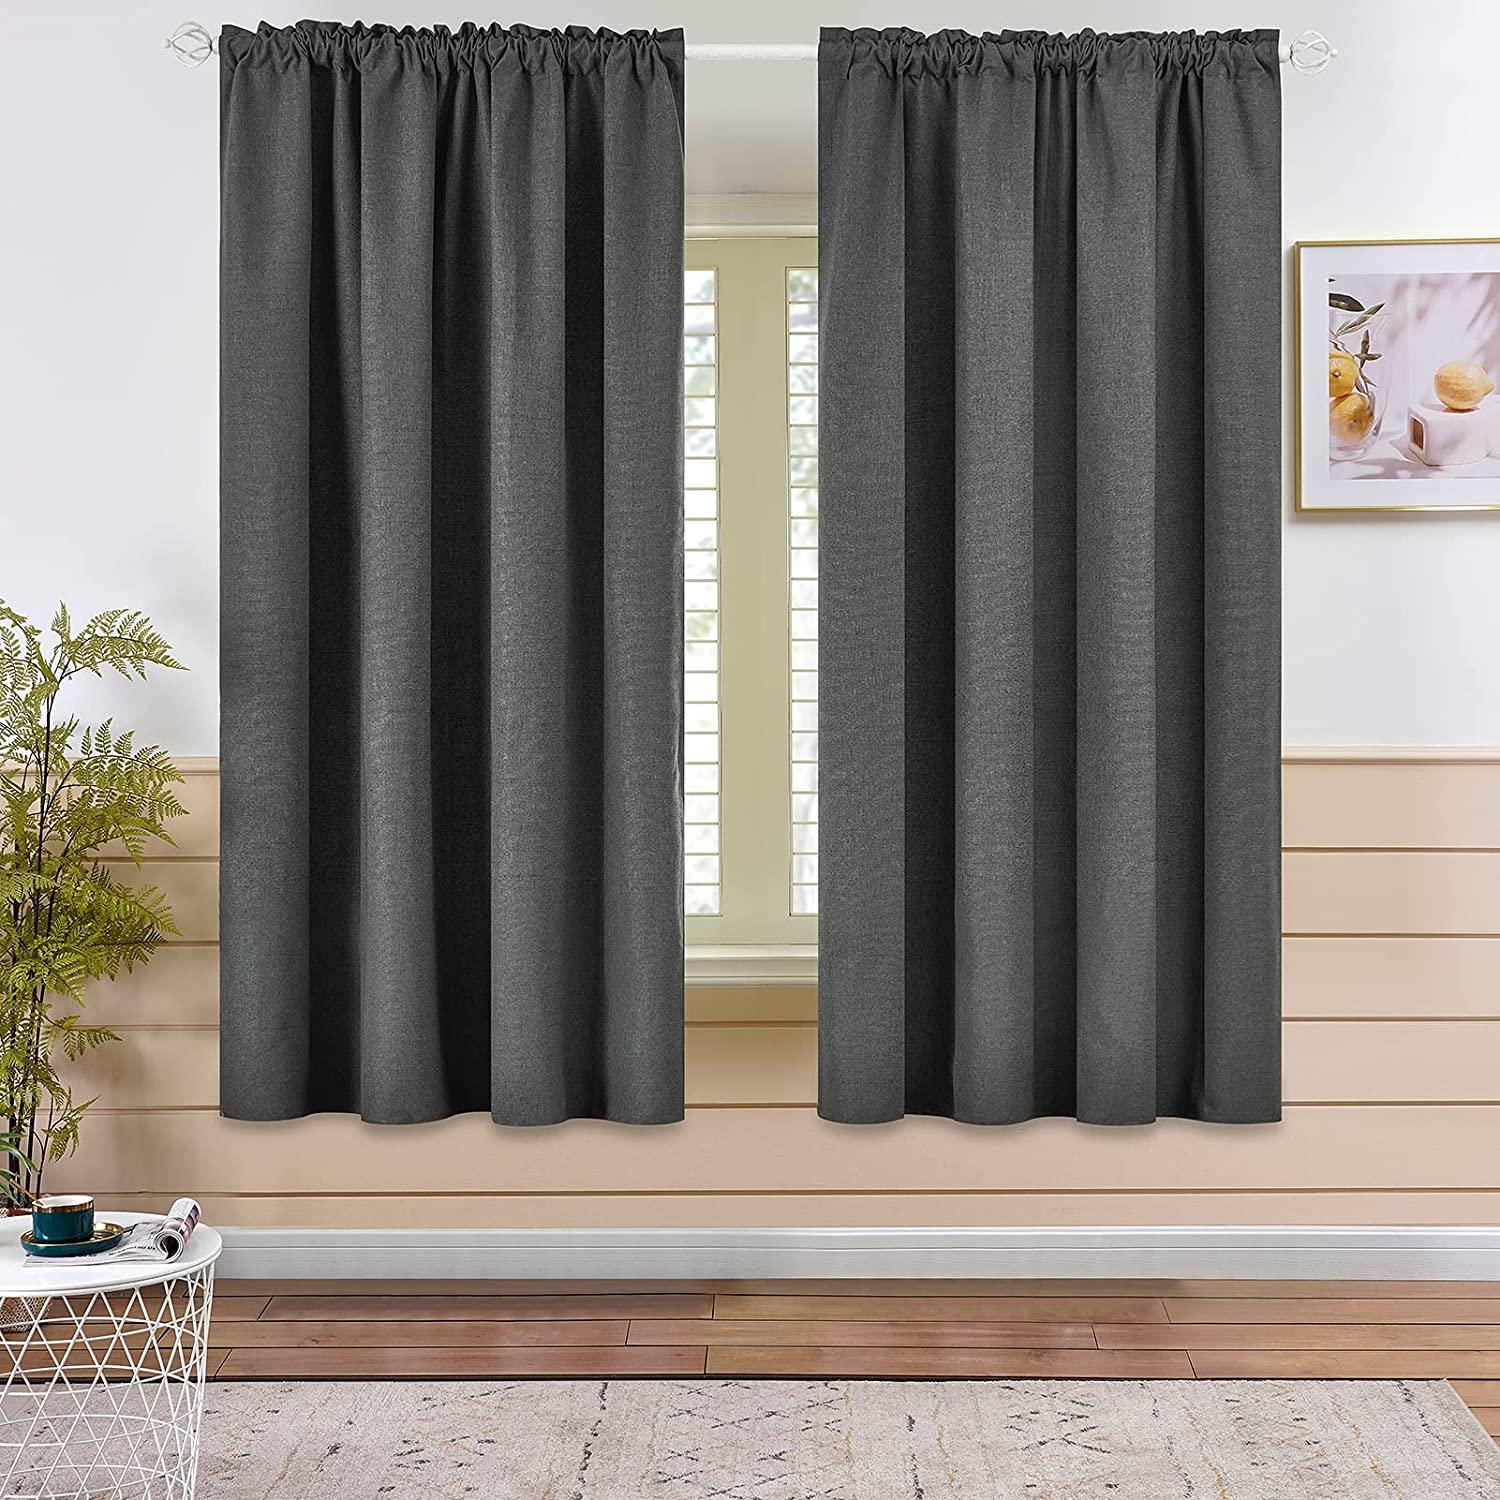 Custom Curtain Recommendation  -Faux Linen 100% Blackout Insulating Curtains Suit Baby Night Shift Worker For Bedroom,Living Room,1 Panel - Topfinel